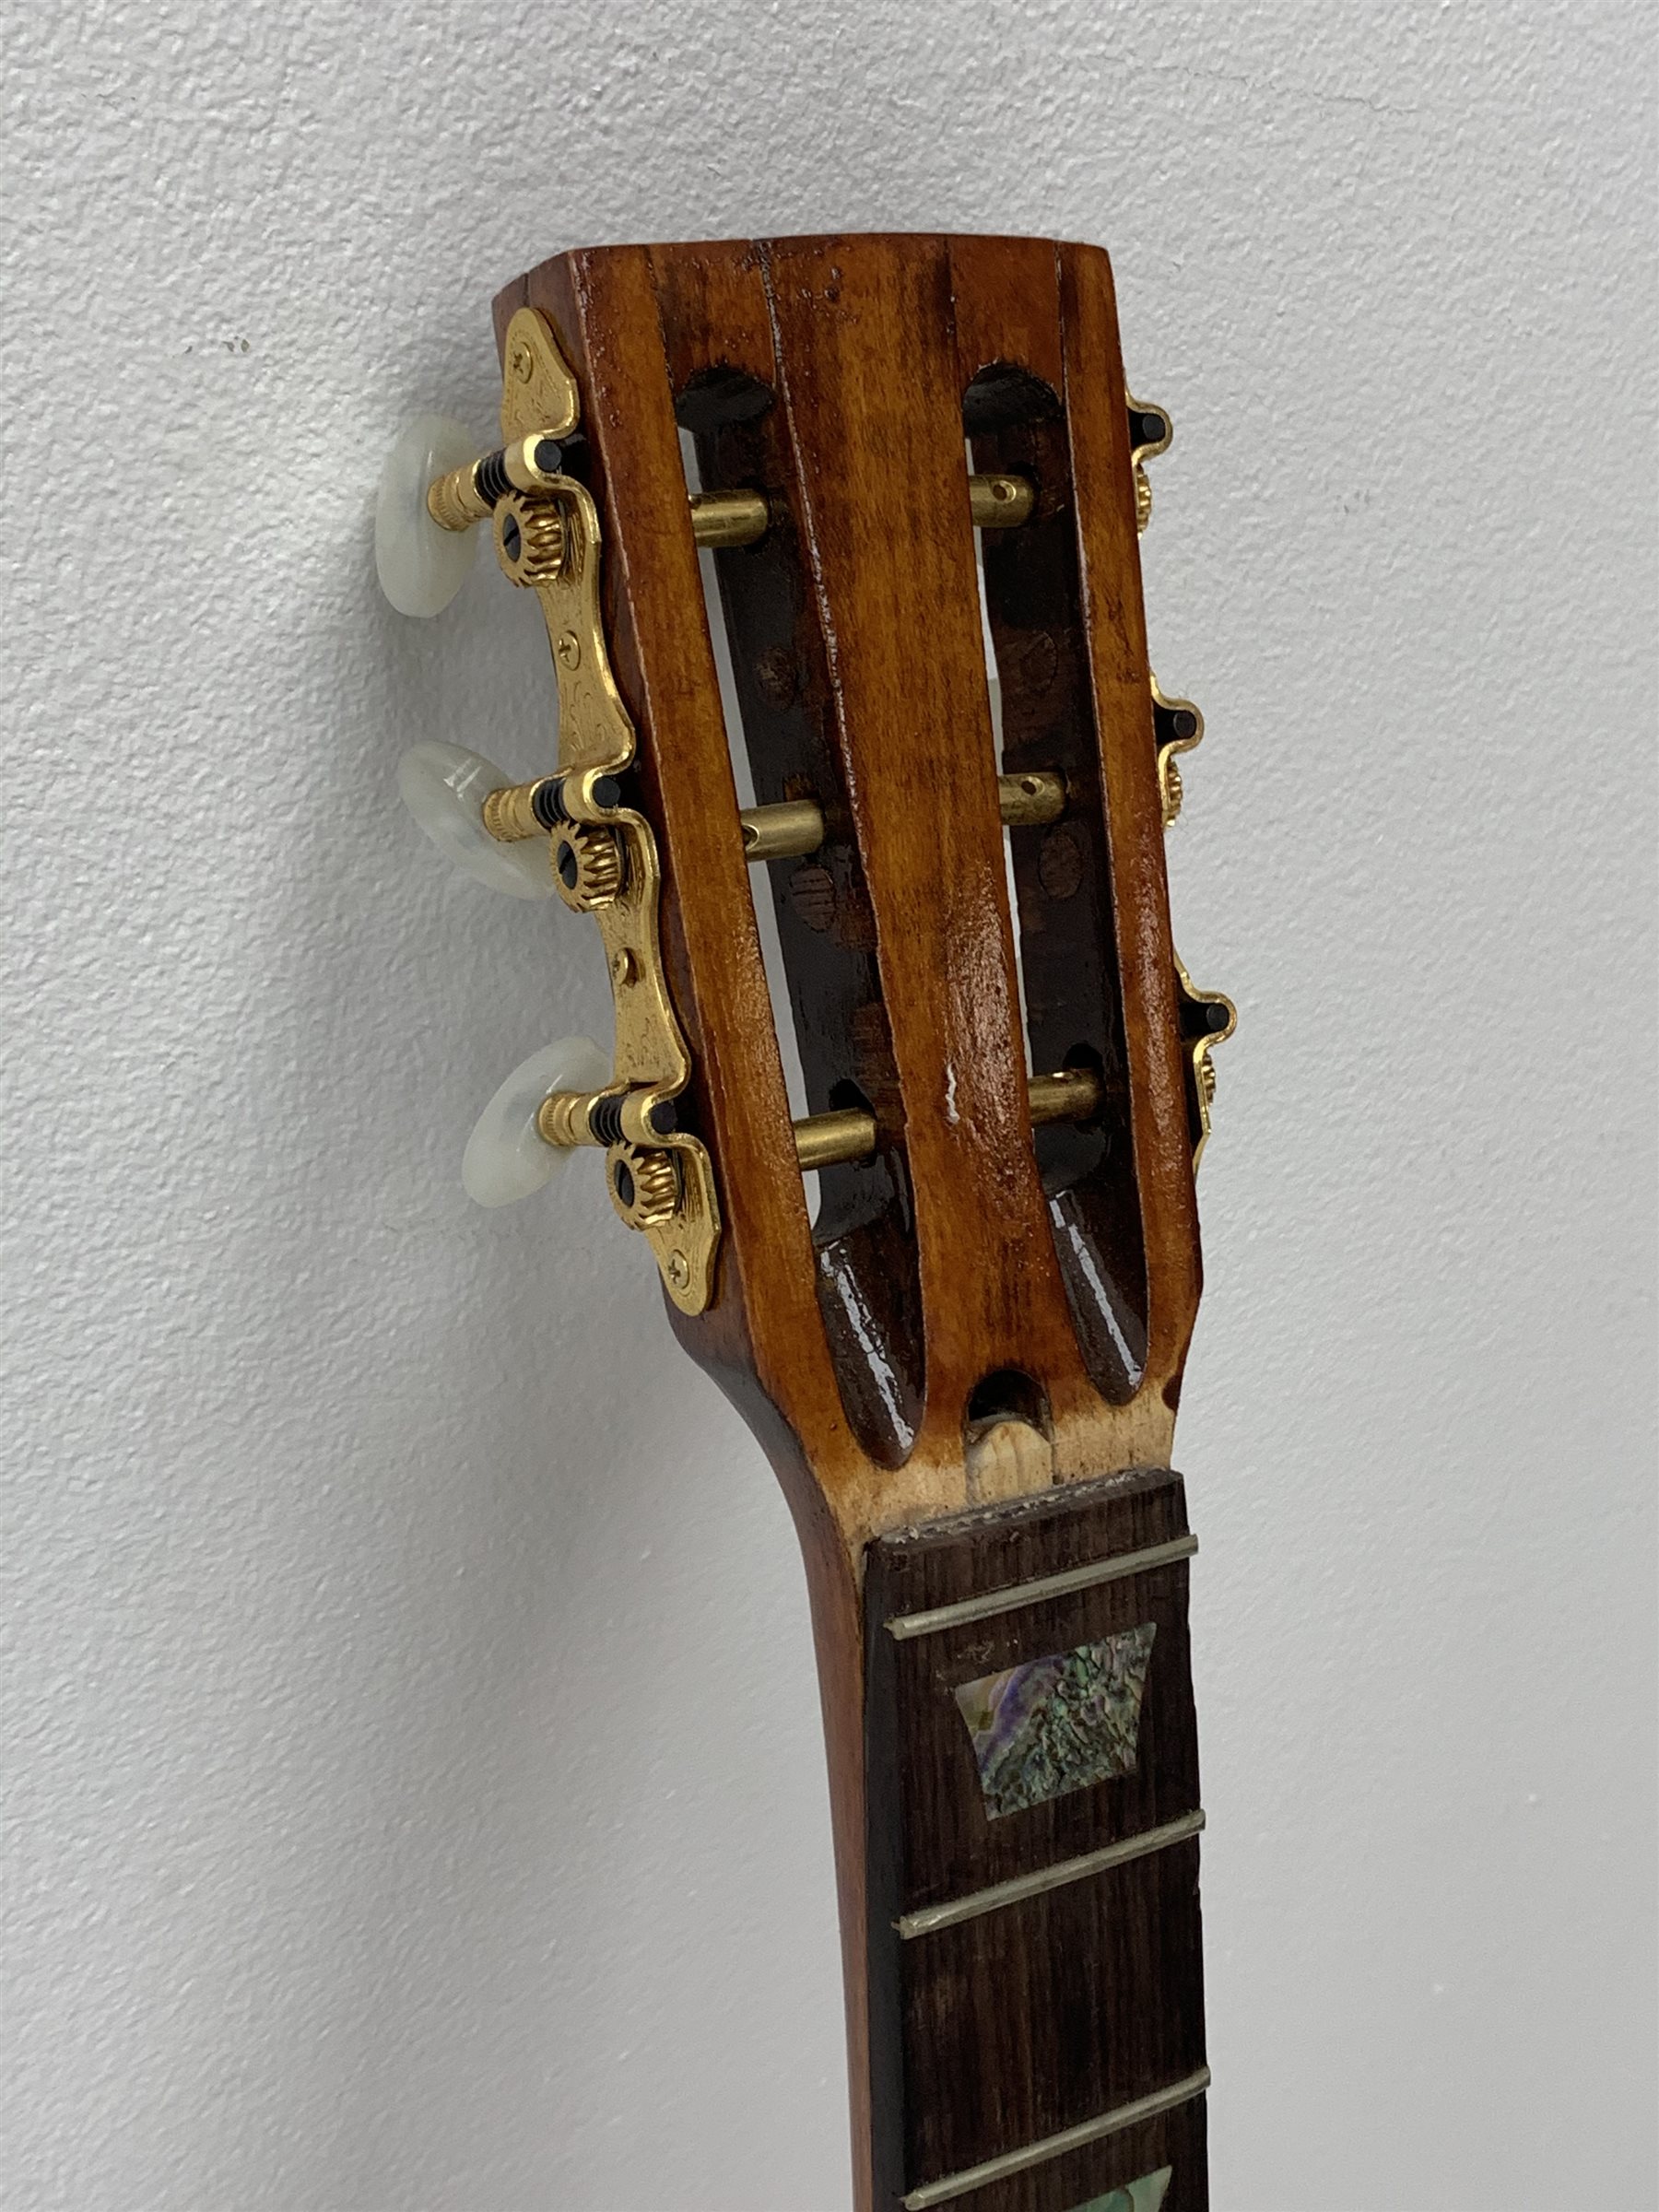 Harmony acoustic guitar - Image 2 of 8